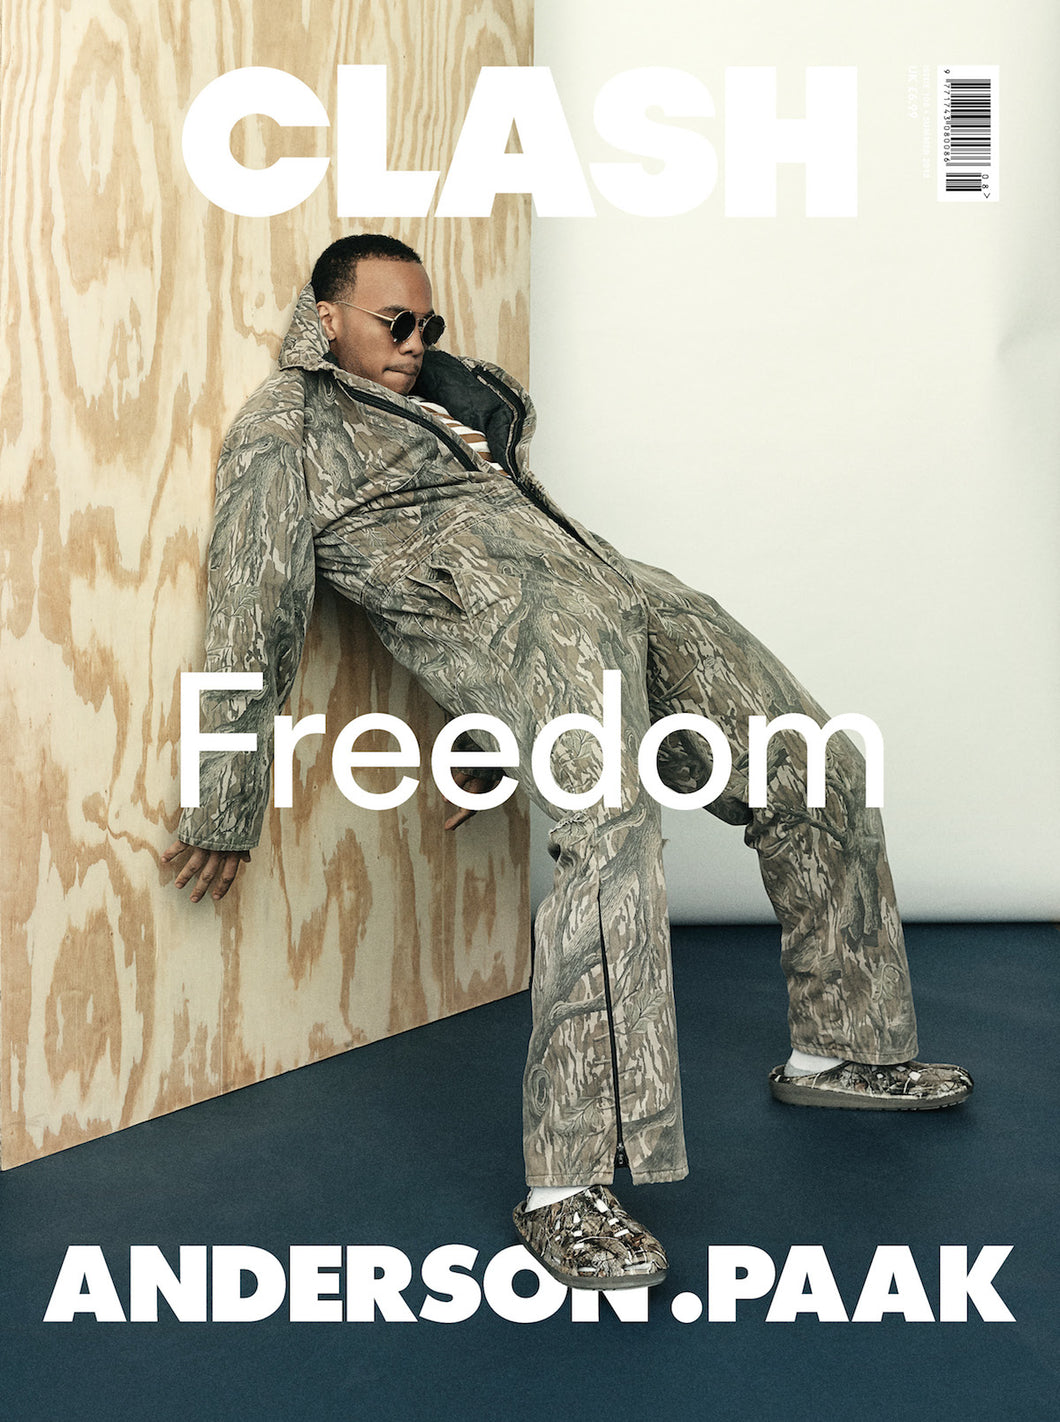 Clash Issue 108 Anderson .Paak